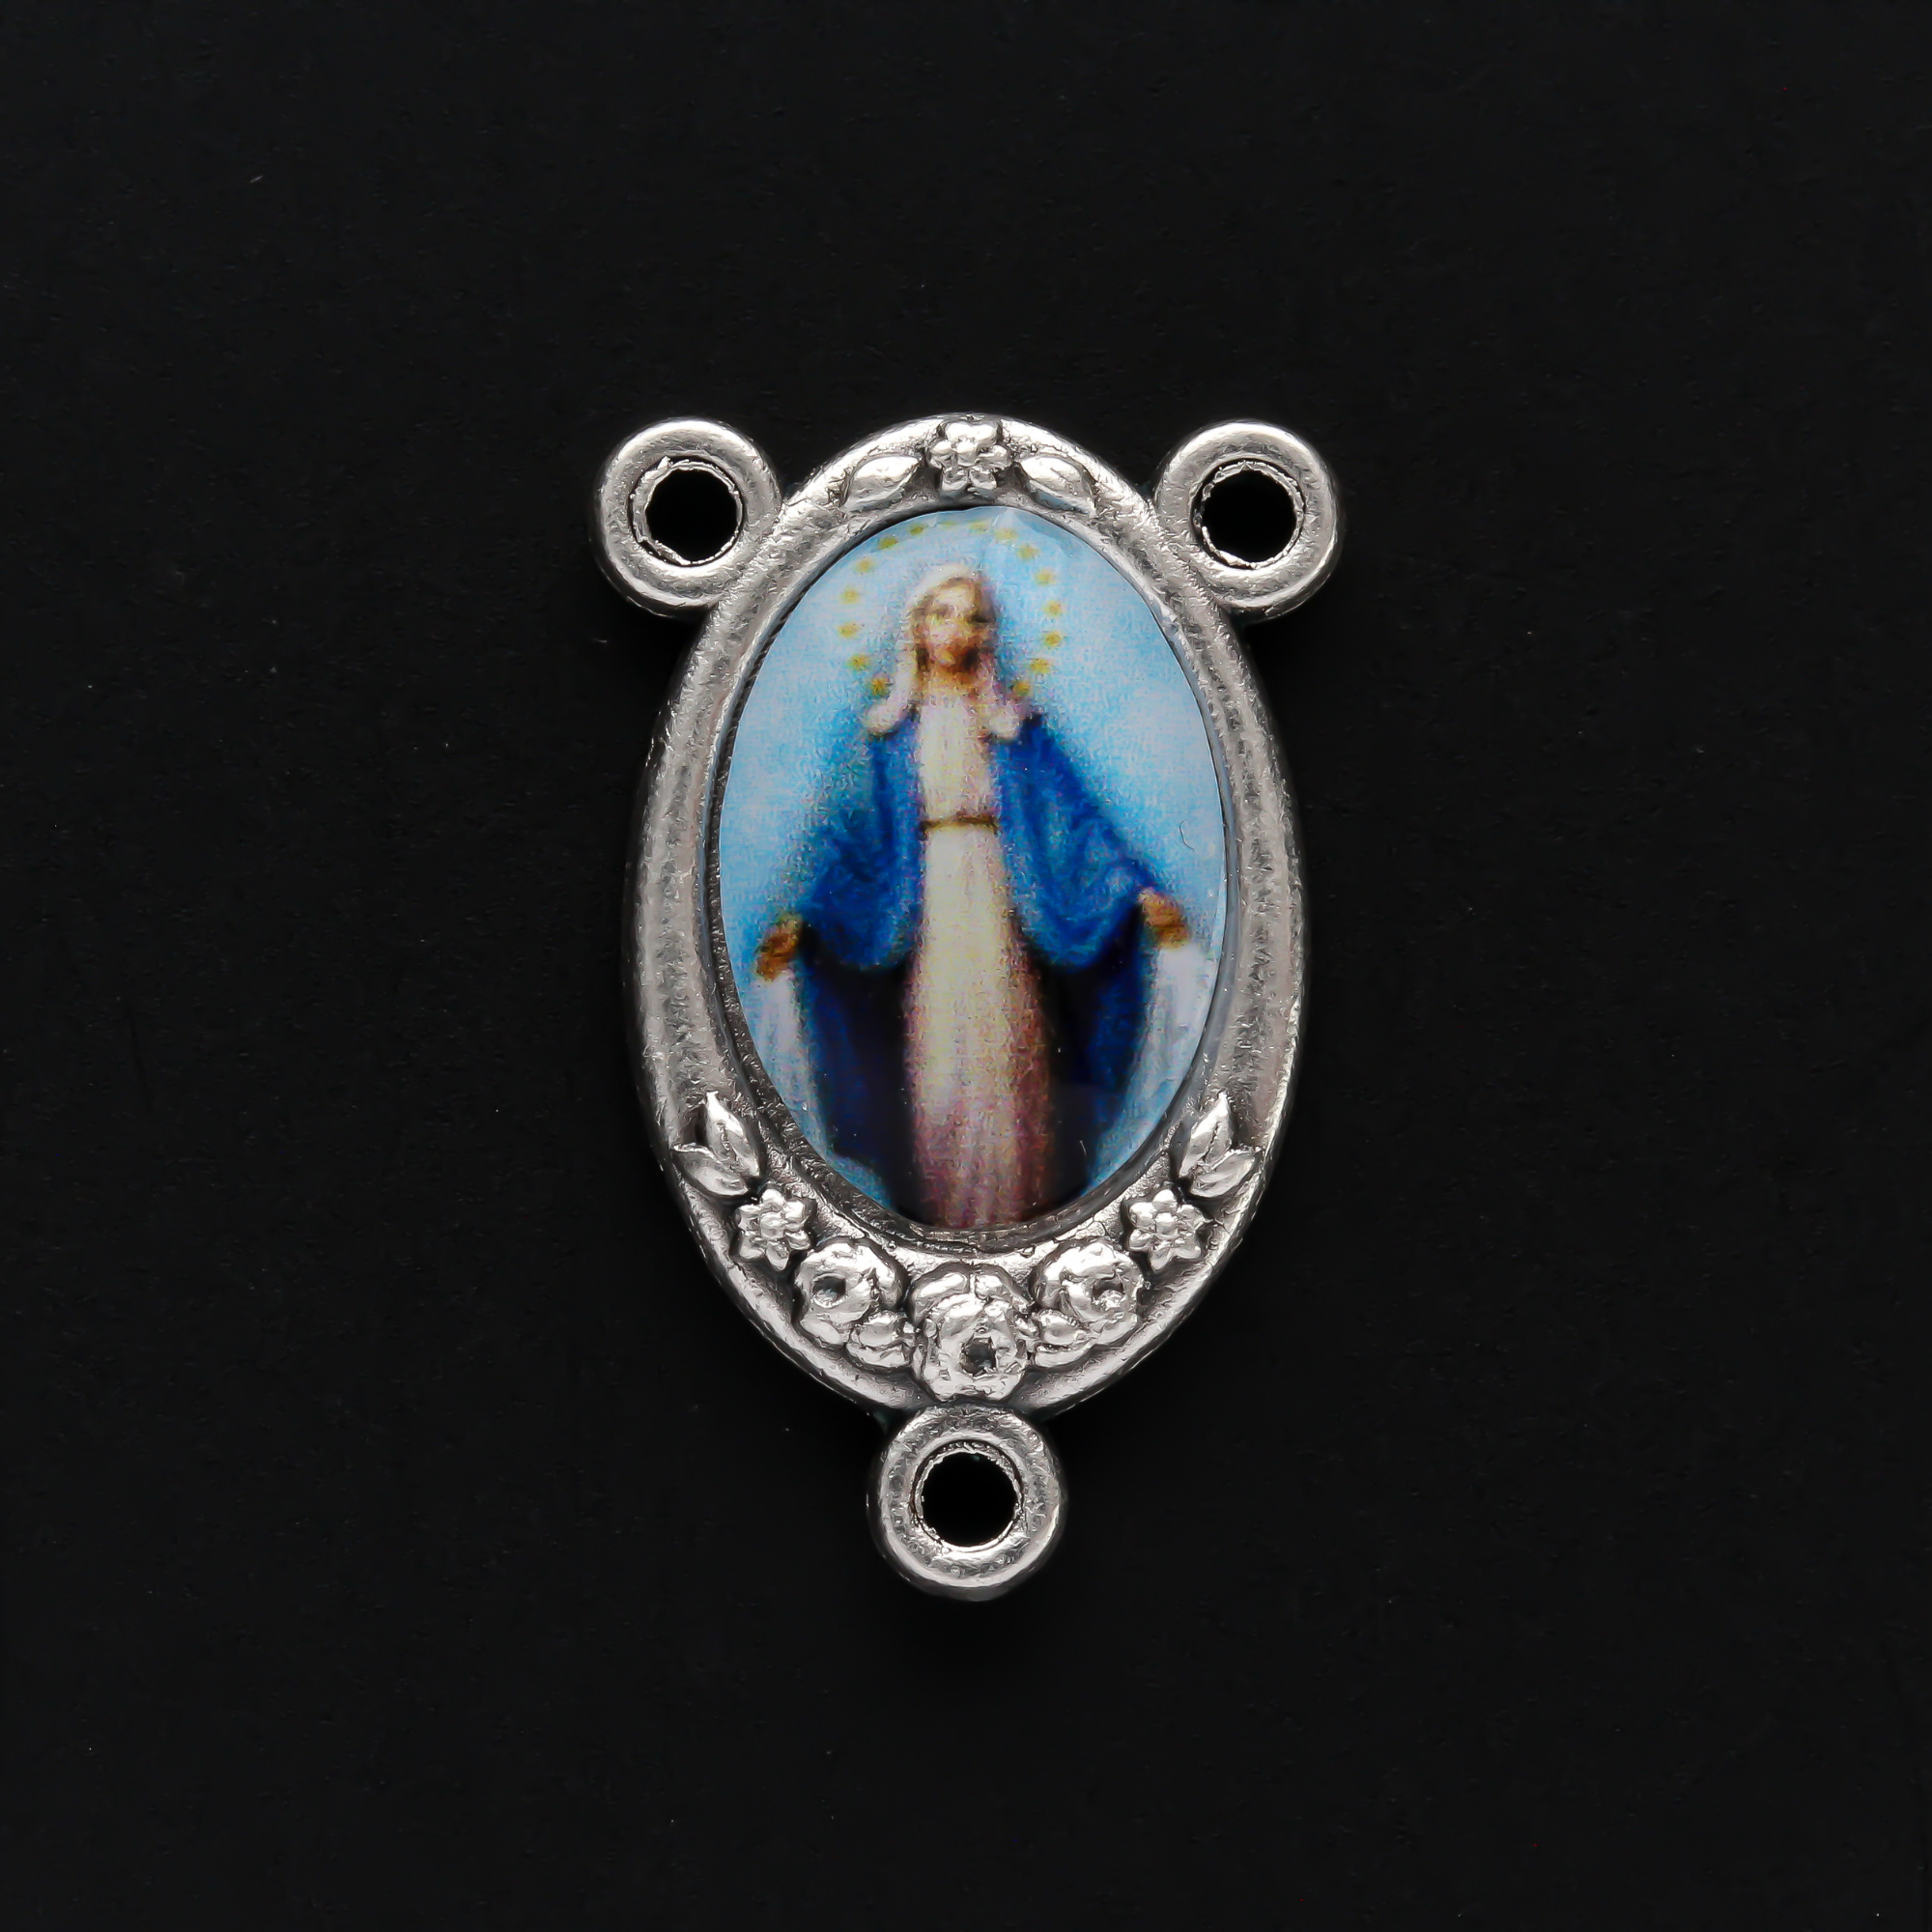 color image of Our Lady of the Miraculous Medal inlaid in a silver oxidized rosary centerpiece